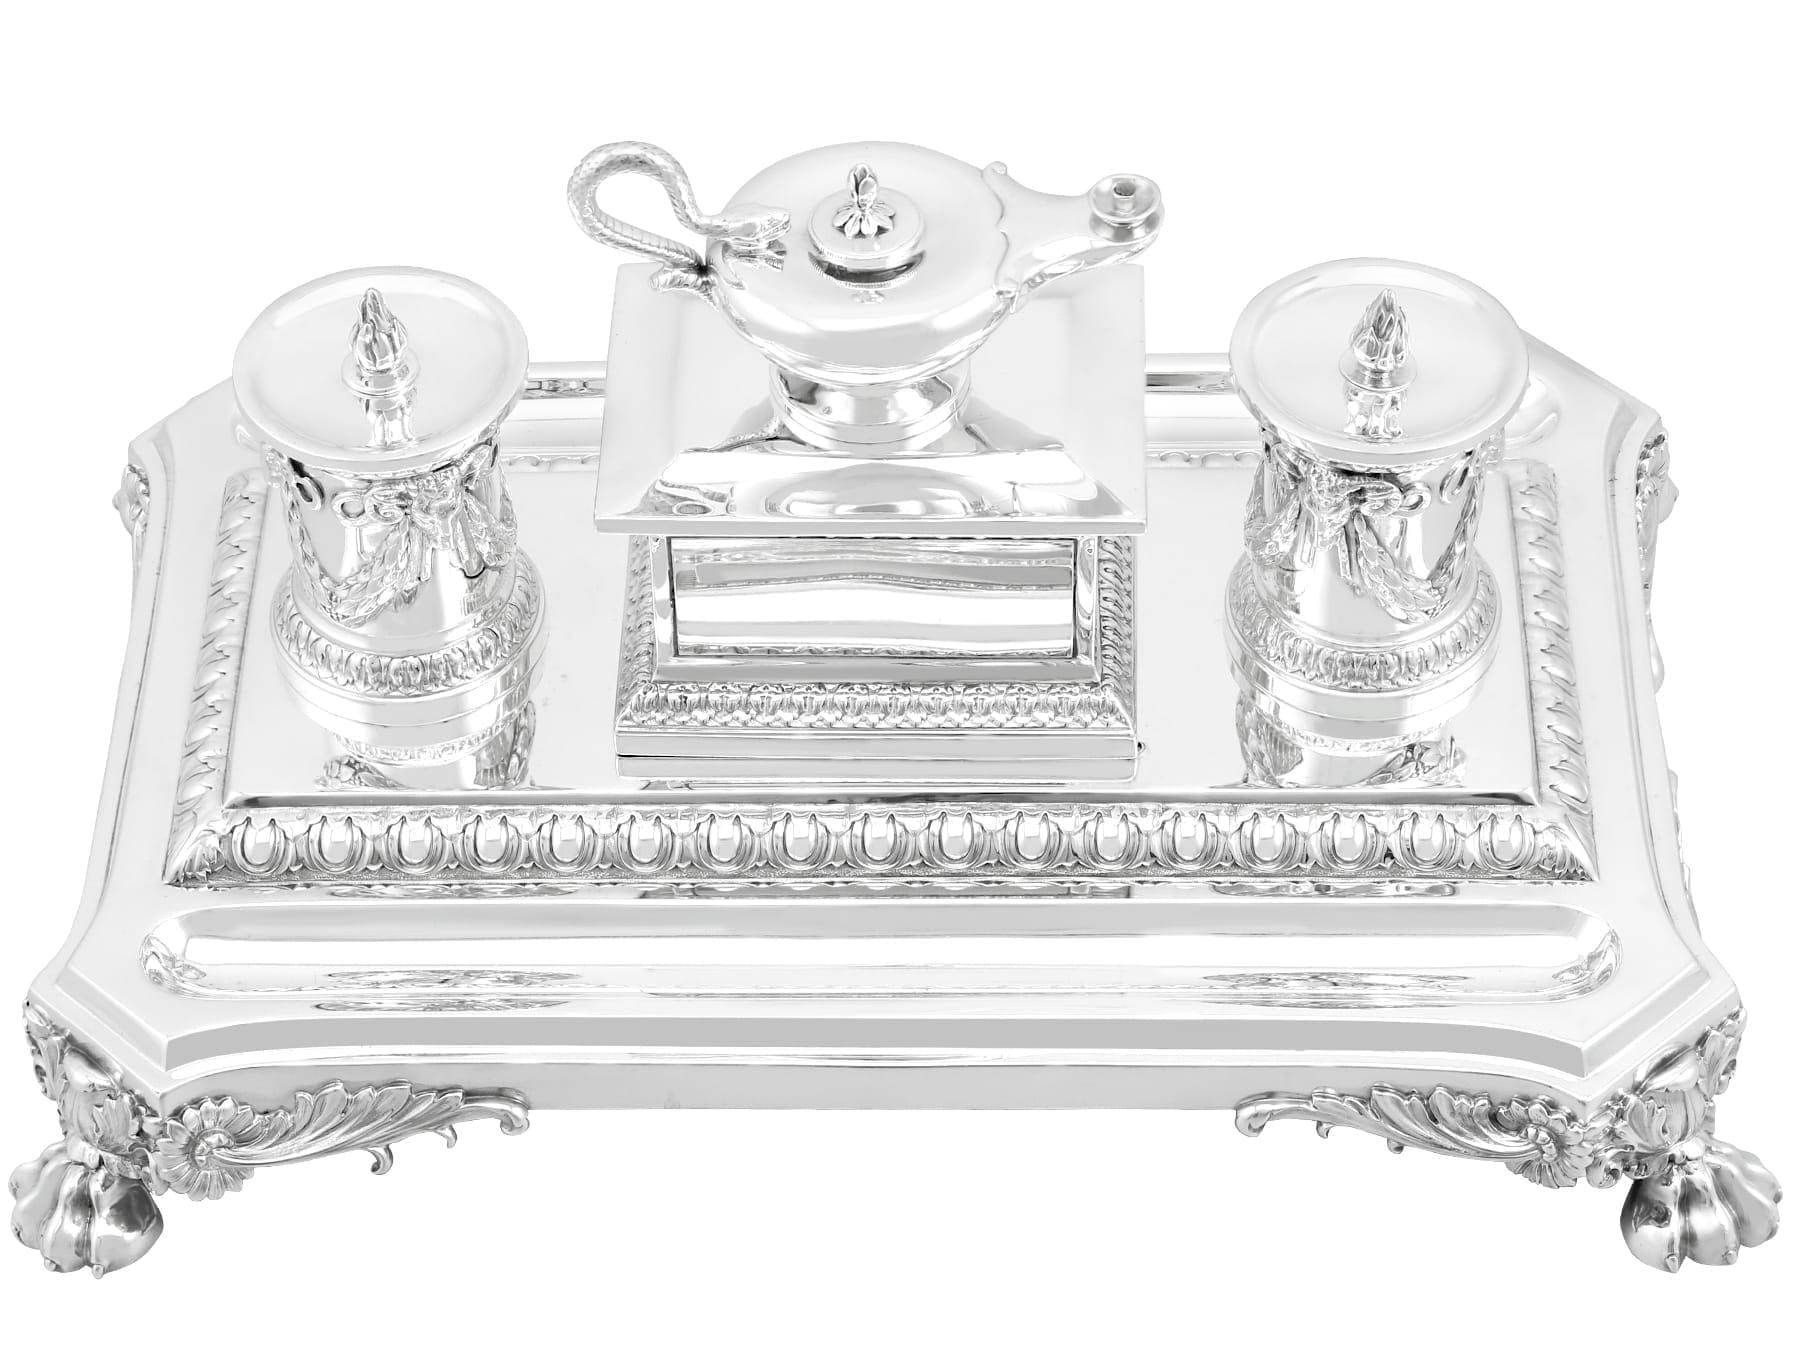 A magnificent, fine and impressive antique Victorian English sterling silver inkstand / desk standish; an addition to our ornamental silverware collection

This magnificent, fine and impressive antique Victorian sterling silver inkstand / desk